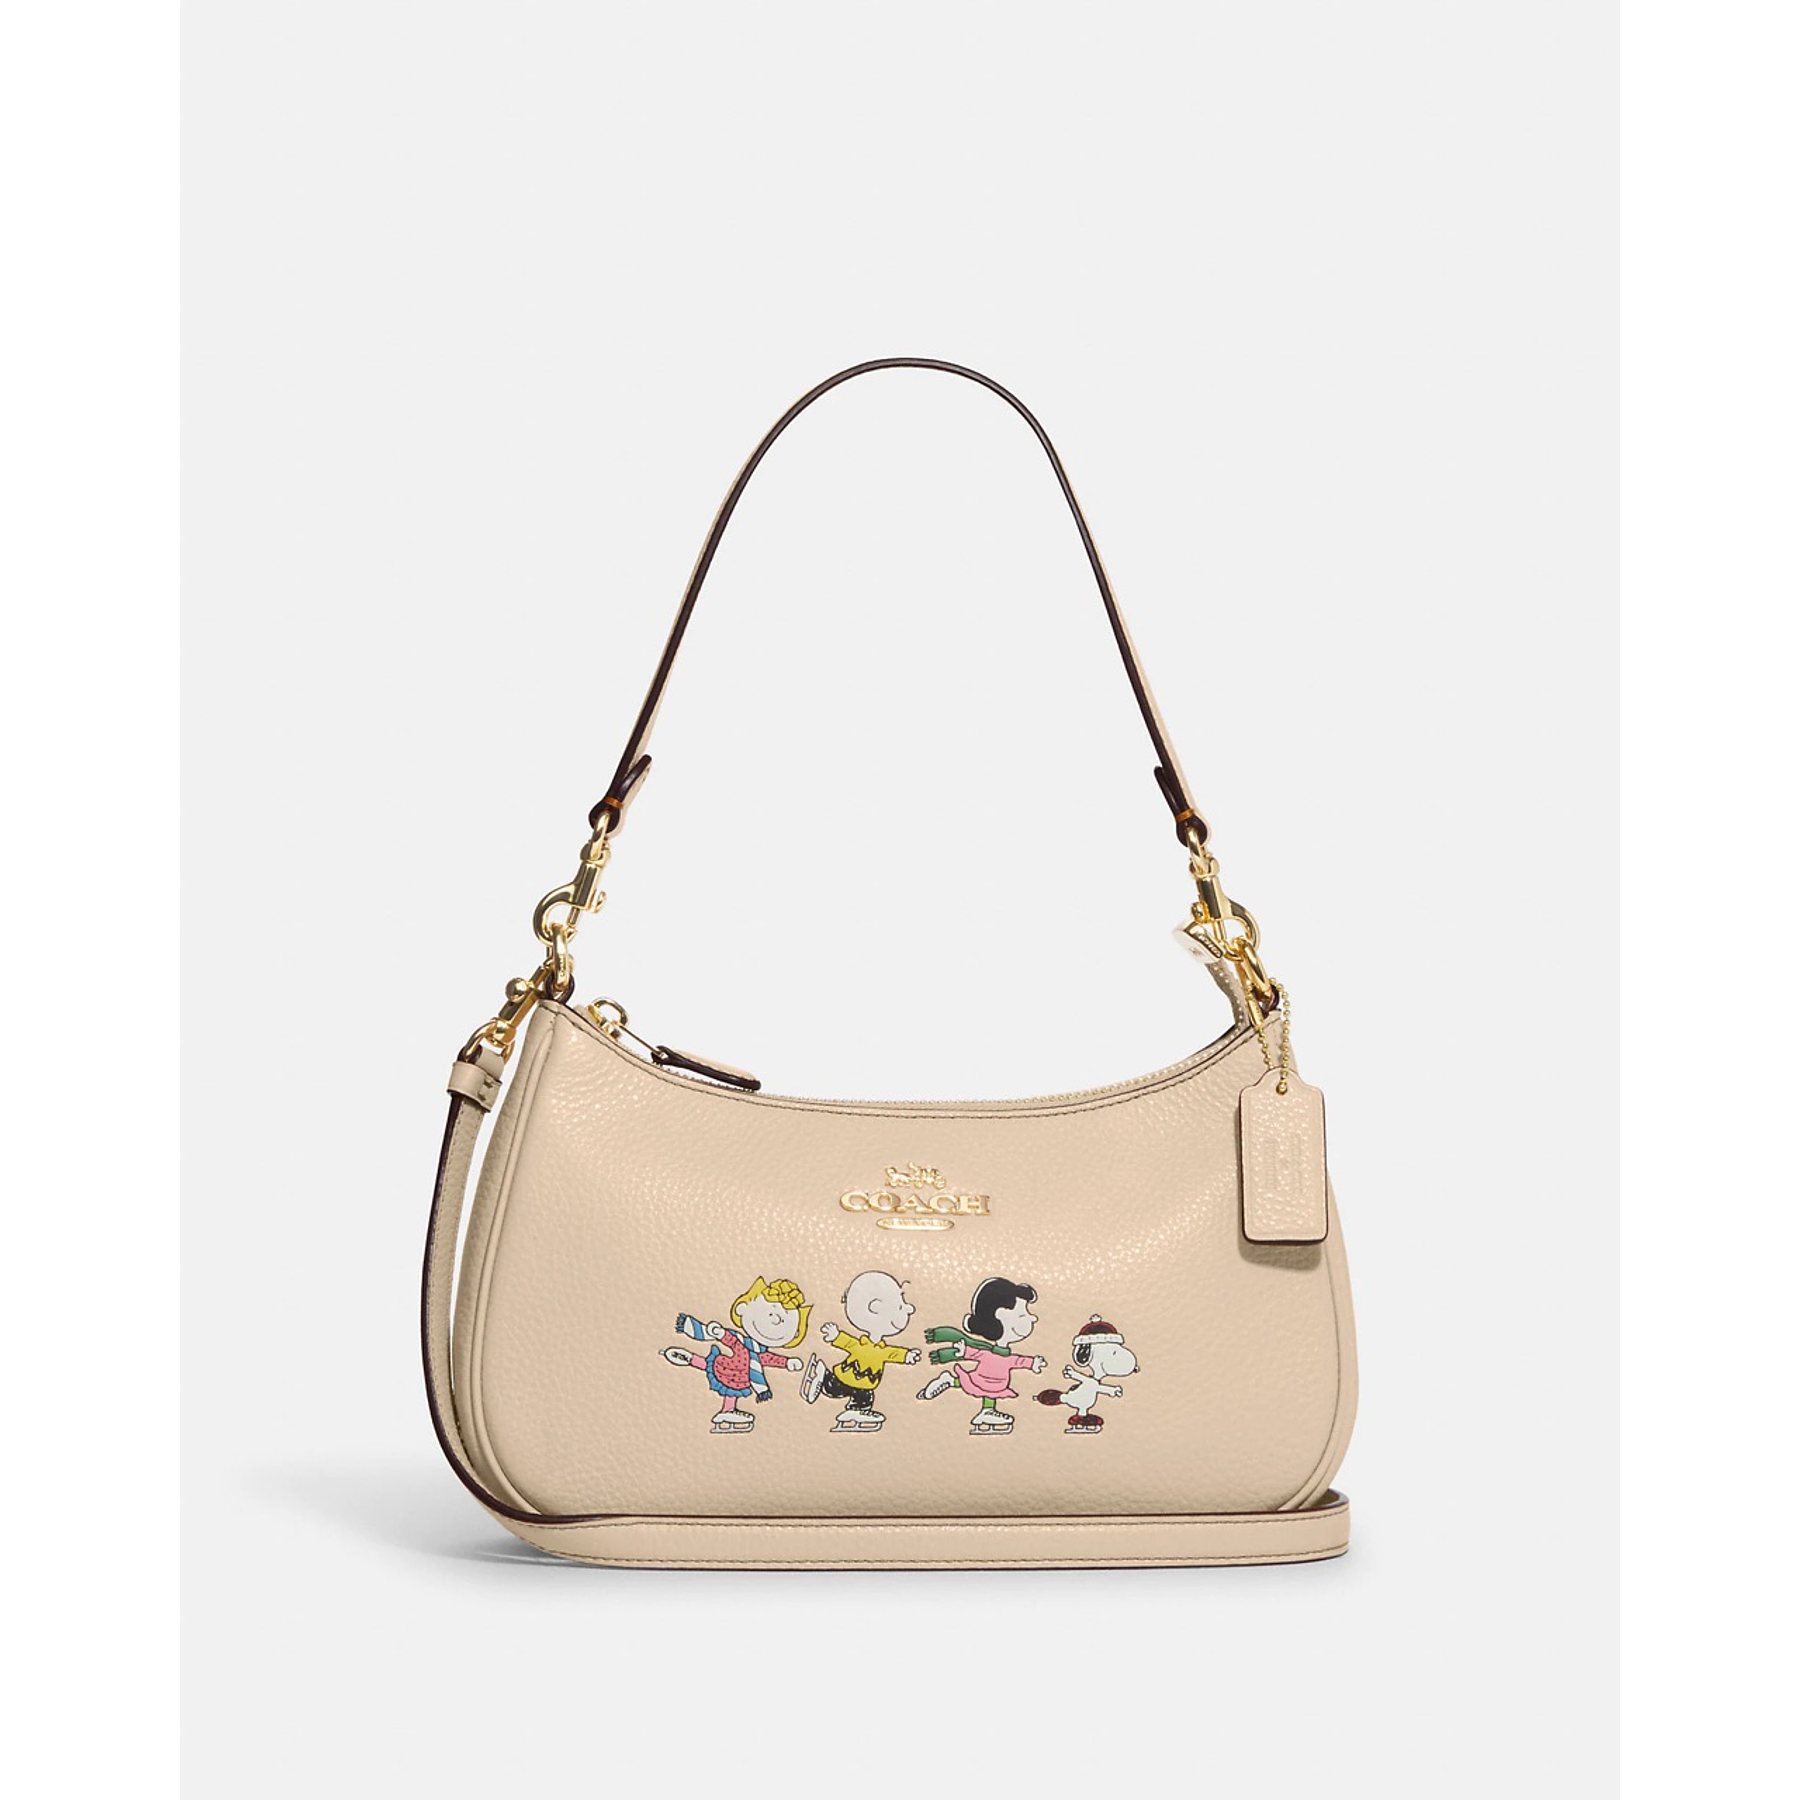 Coach X Peanuts Teri Shoulder Bag With Snoopy And Friends Motif